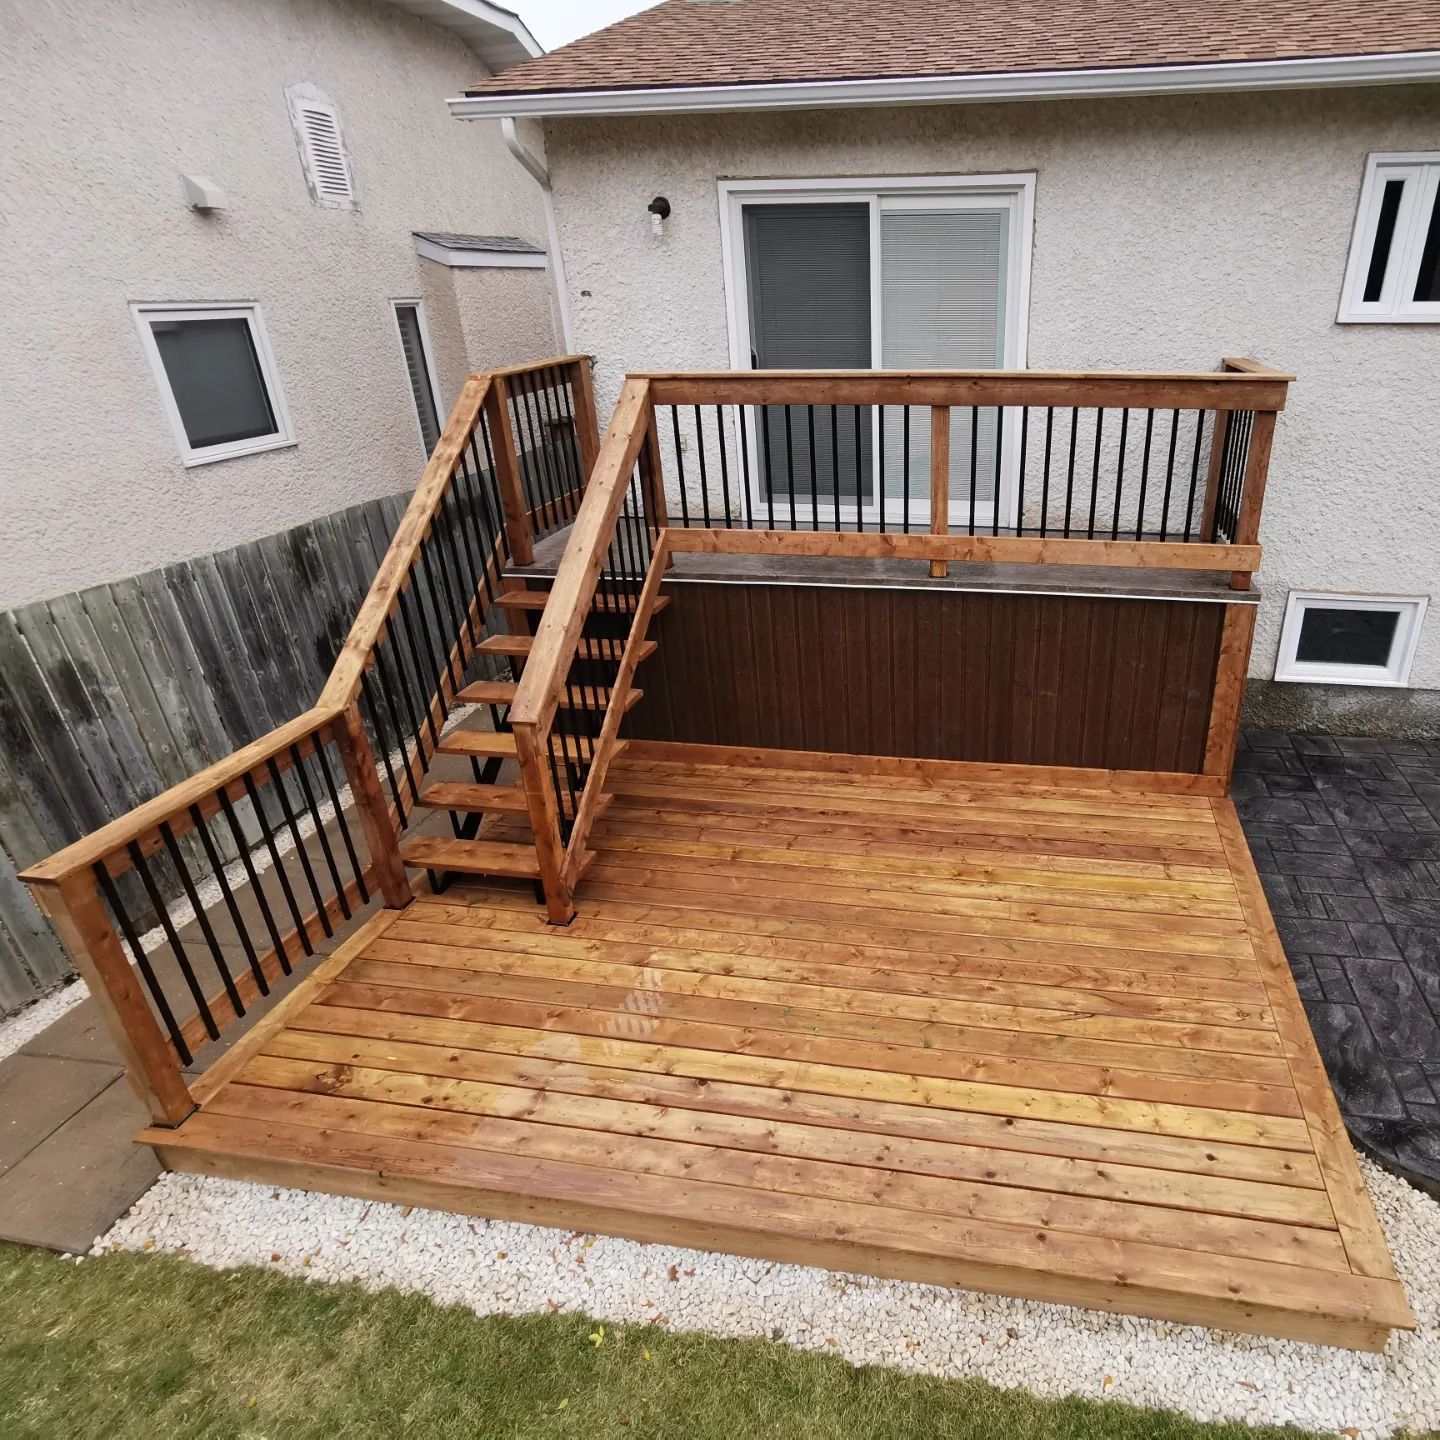 Island Deck Design With Stairs